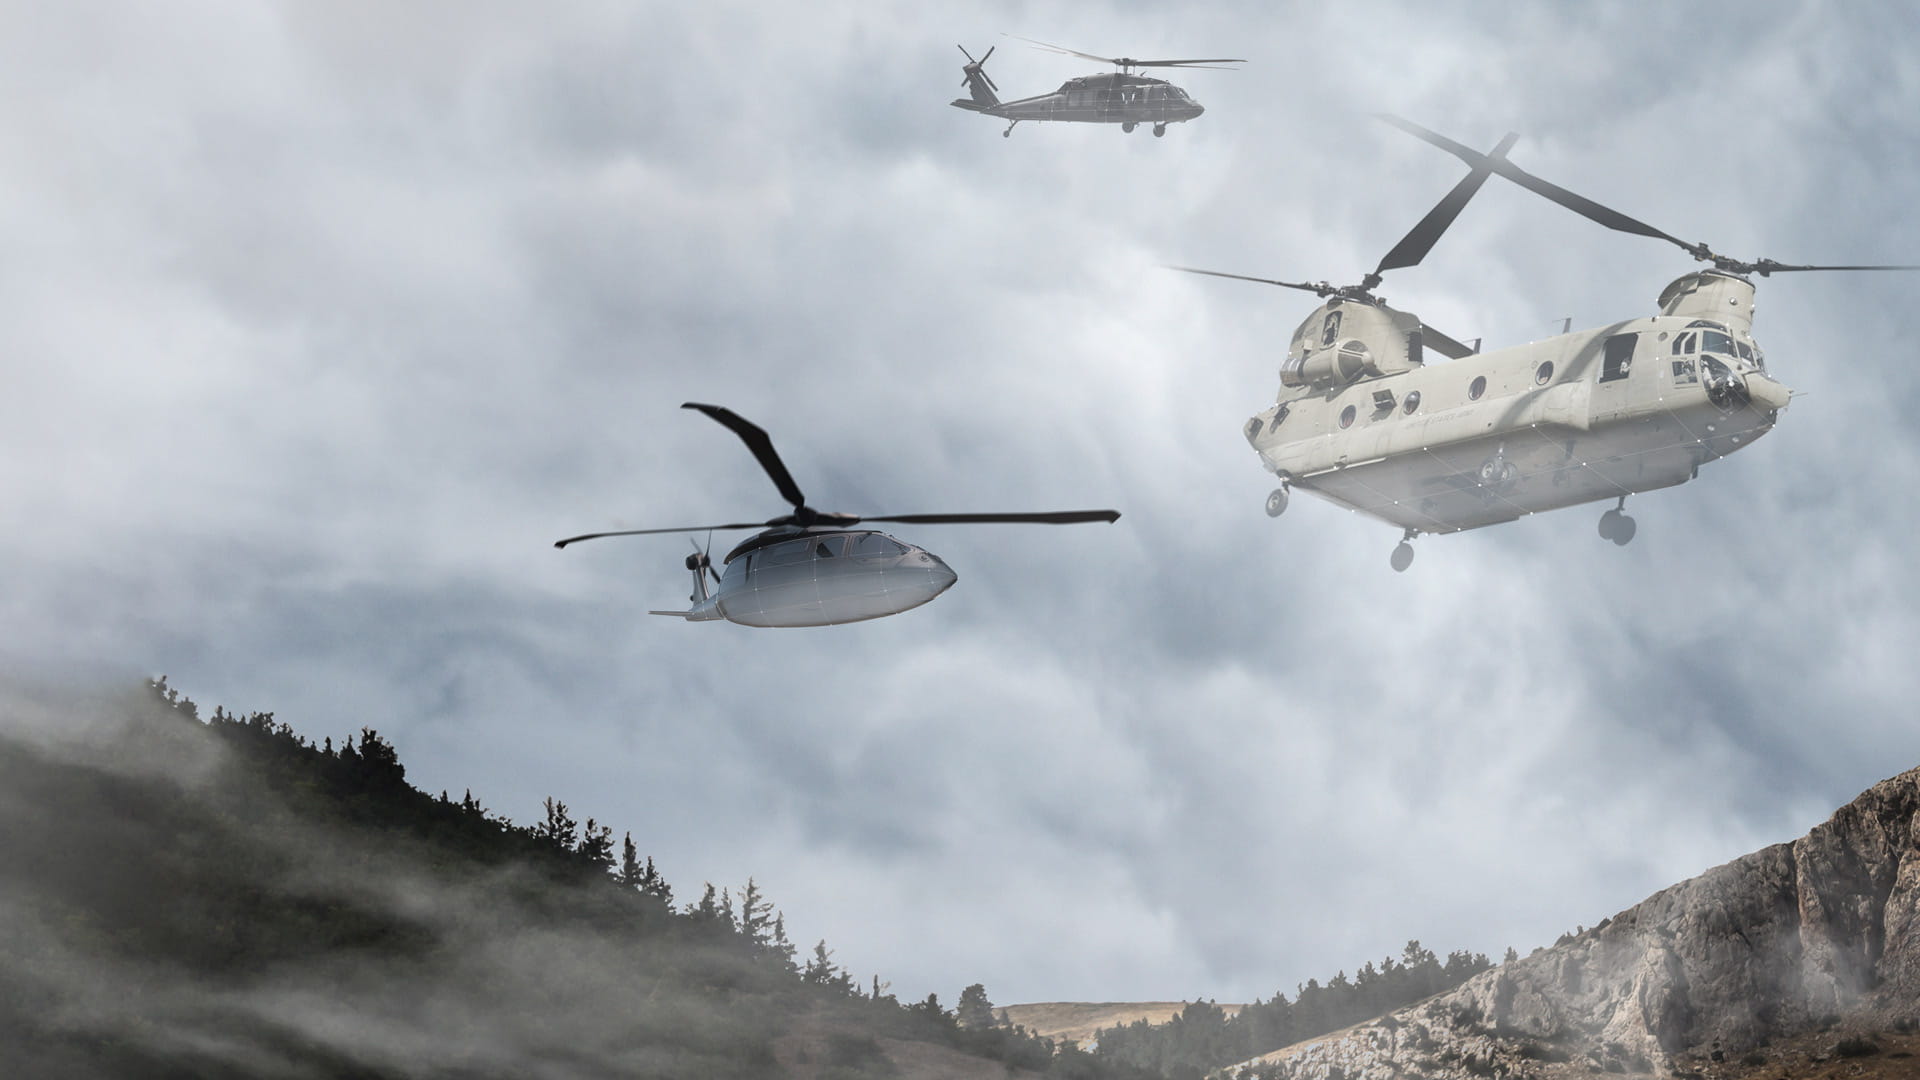 Computer illustration of an FVL helicopter, a CH-47 helicopter, and a UH-60 helicopter